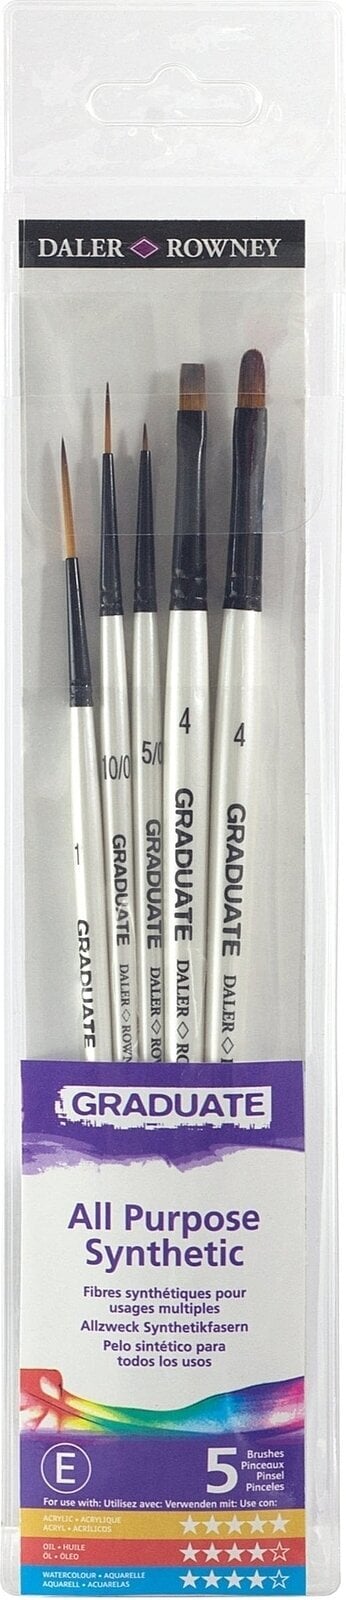 Pinsel Daler Rowney Graduate Multi-Technique Brush Synthetic Pinselset 1 Stck